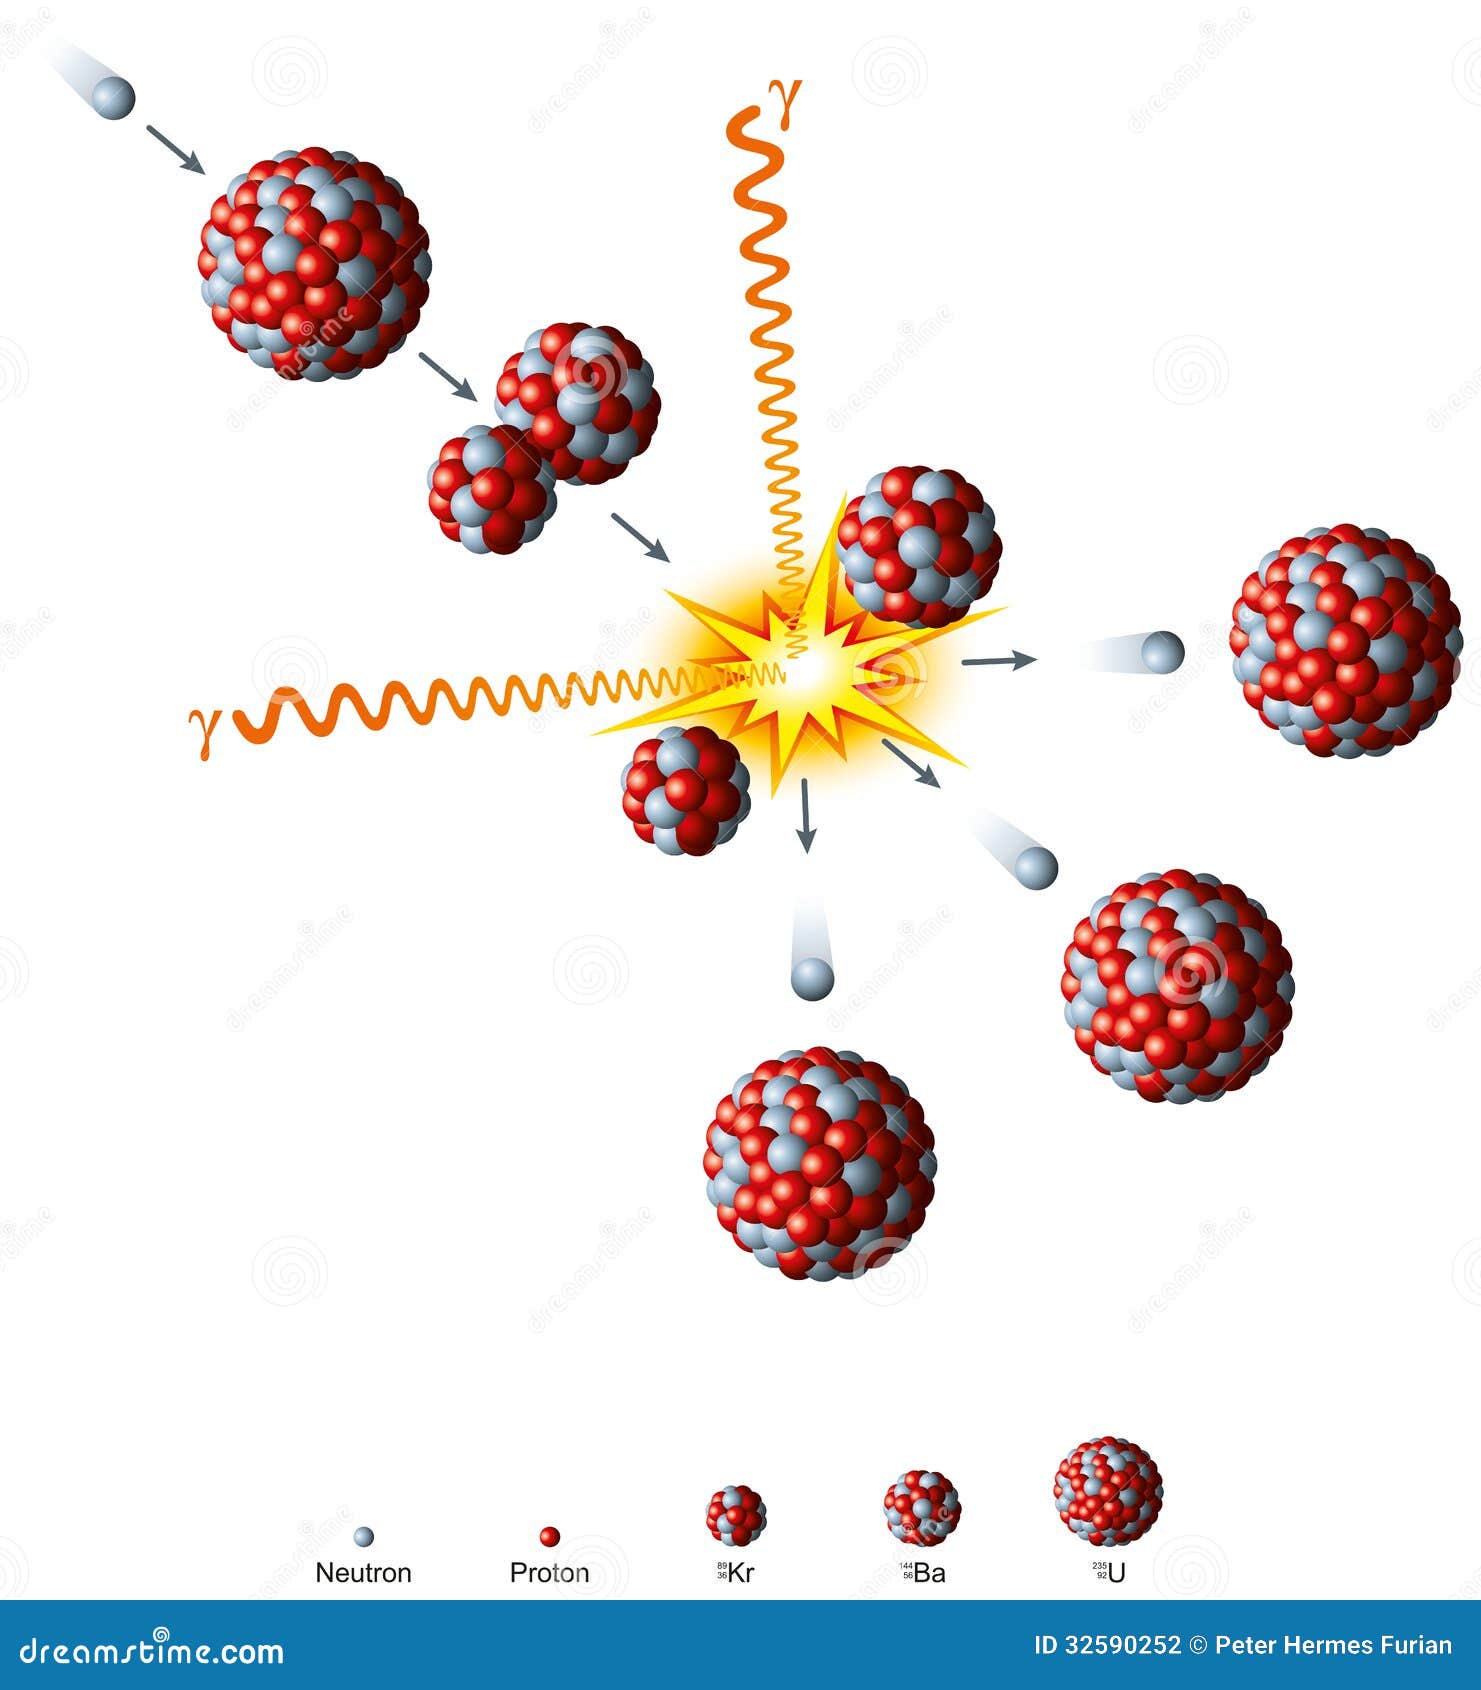 The science behind the use of isotope of an atom in nuclear energy production